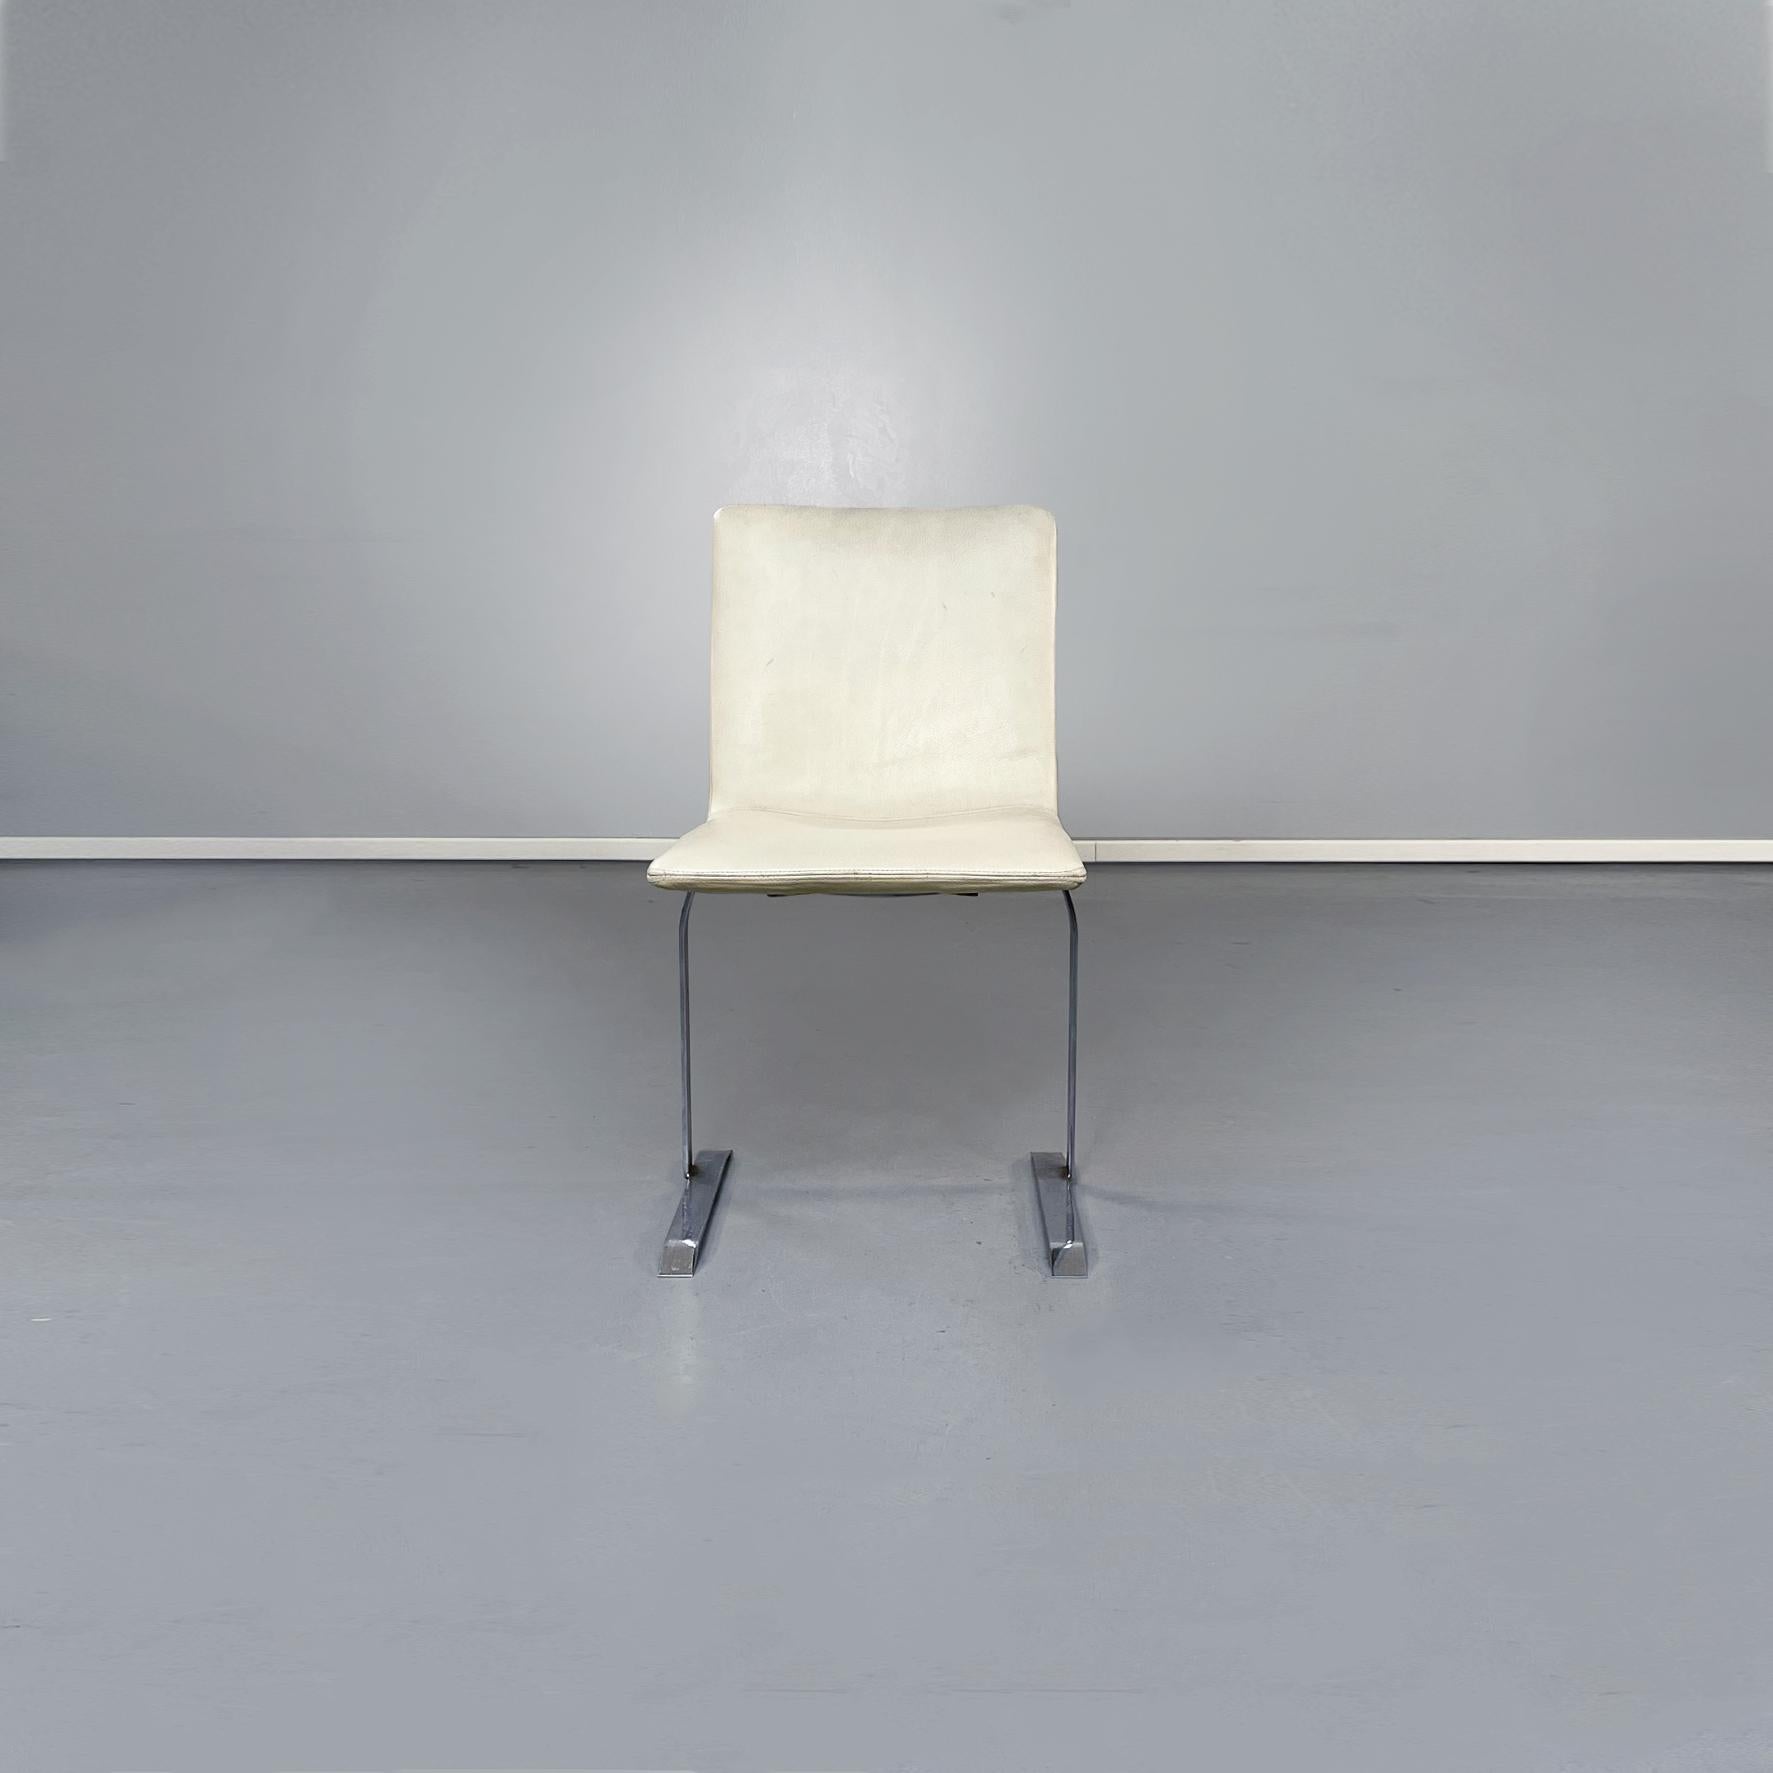 Italian mid-century white leather and steel chairs by Offredi for Saporiti, 1970s
Six chairs with curved padded seat covered in white leather, while the structure is in steel.
Produced by Saporiti in 1970s and designed by Giovanni Offredi. Labels